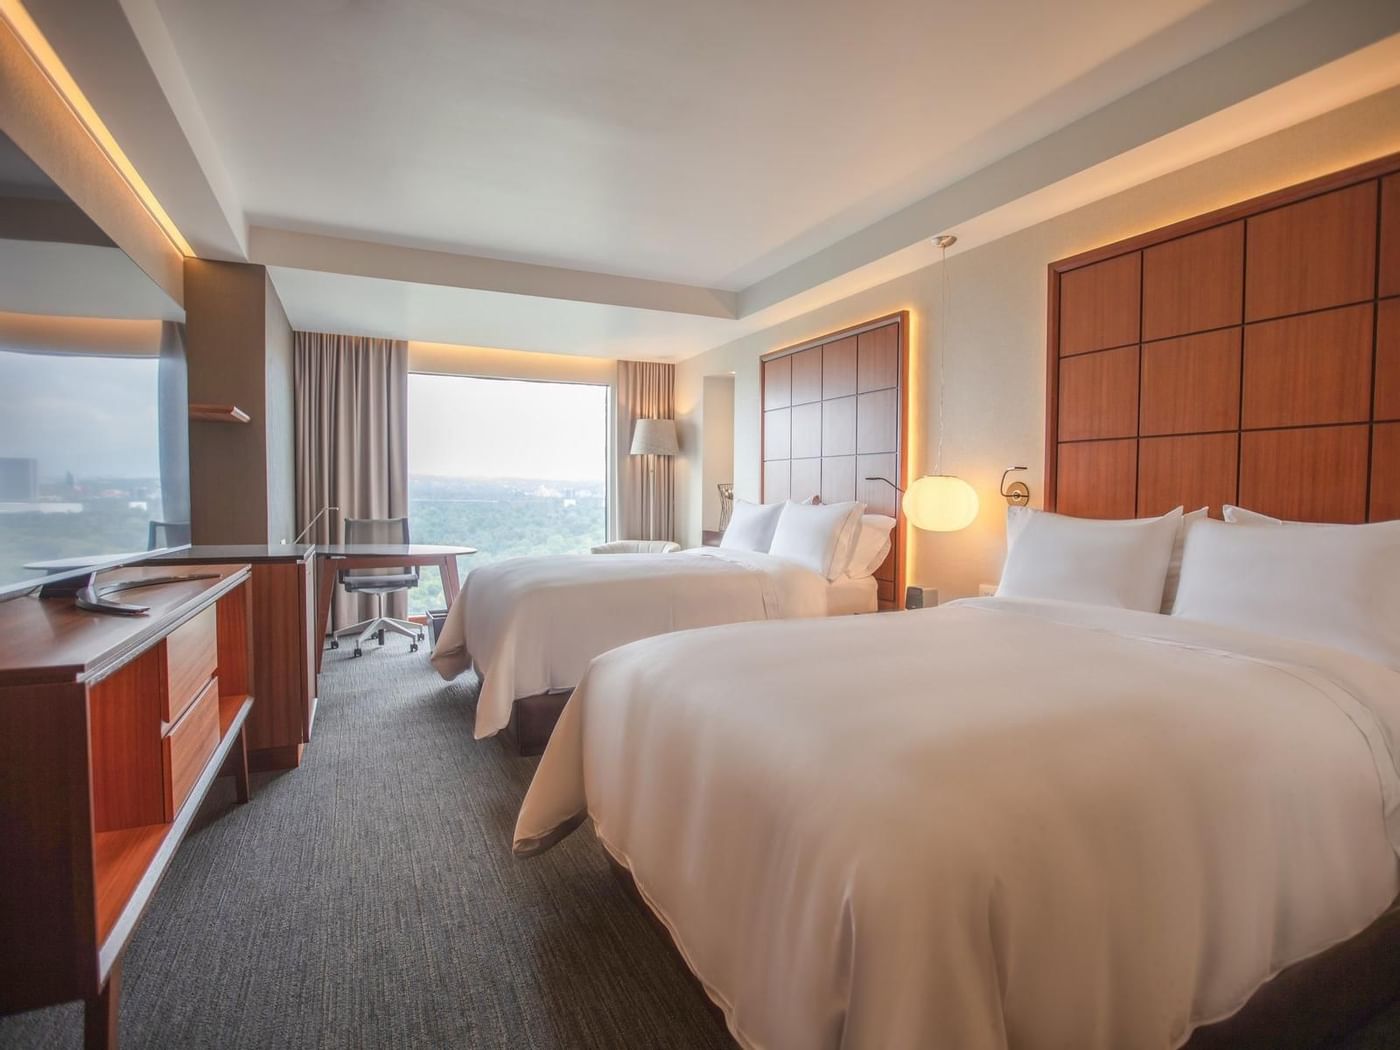 Deluxe Room with 2 beds and furniture at Grand Fiesta Americana